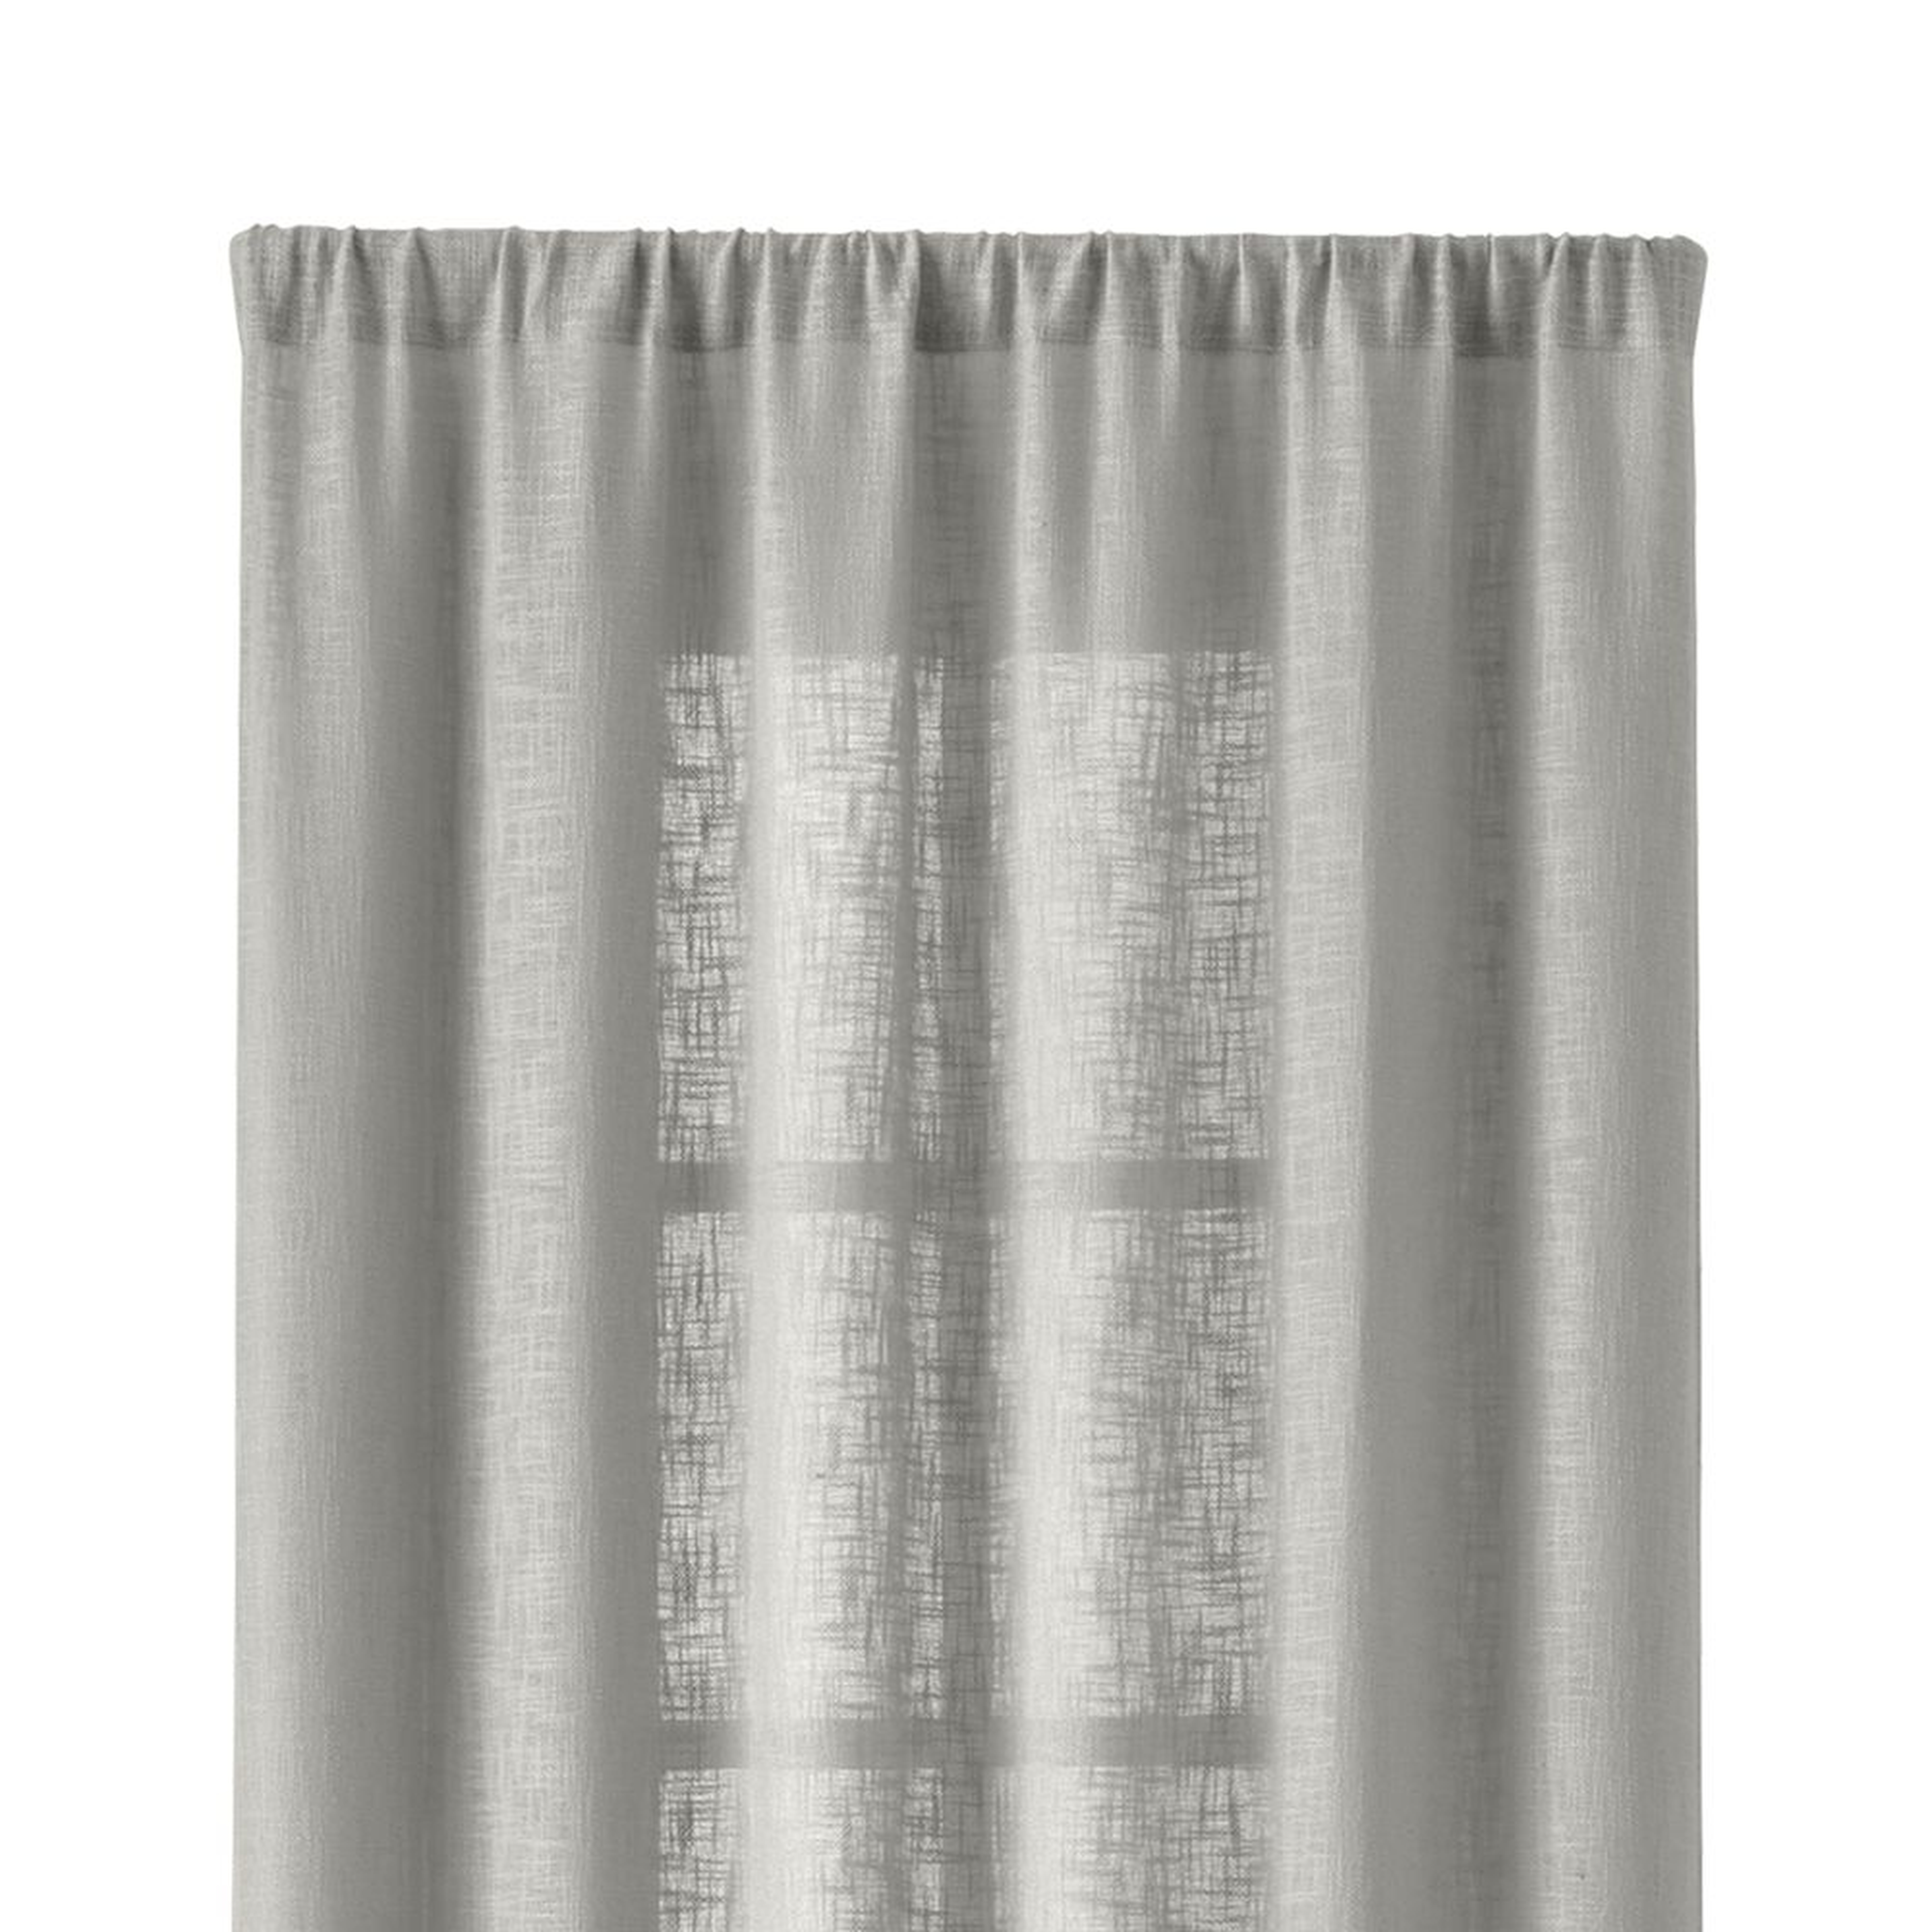 Lindstrom 48"x108" Grey Curtain Panel - Crate and Barrel